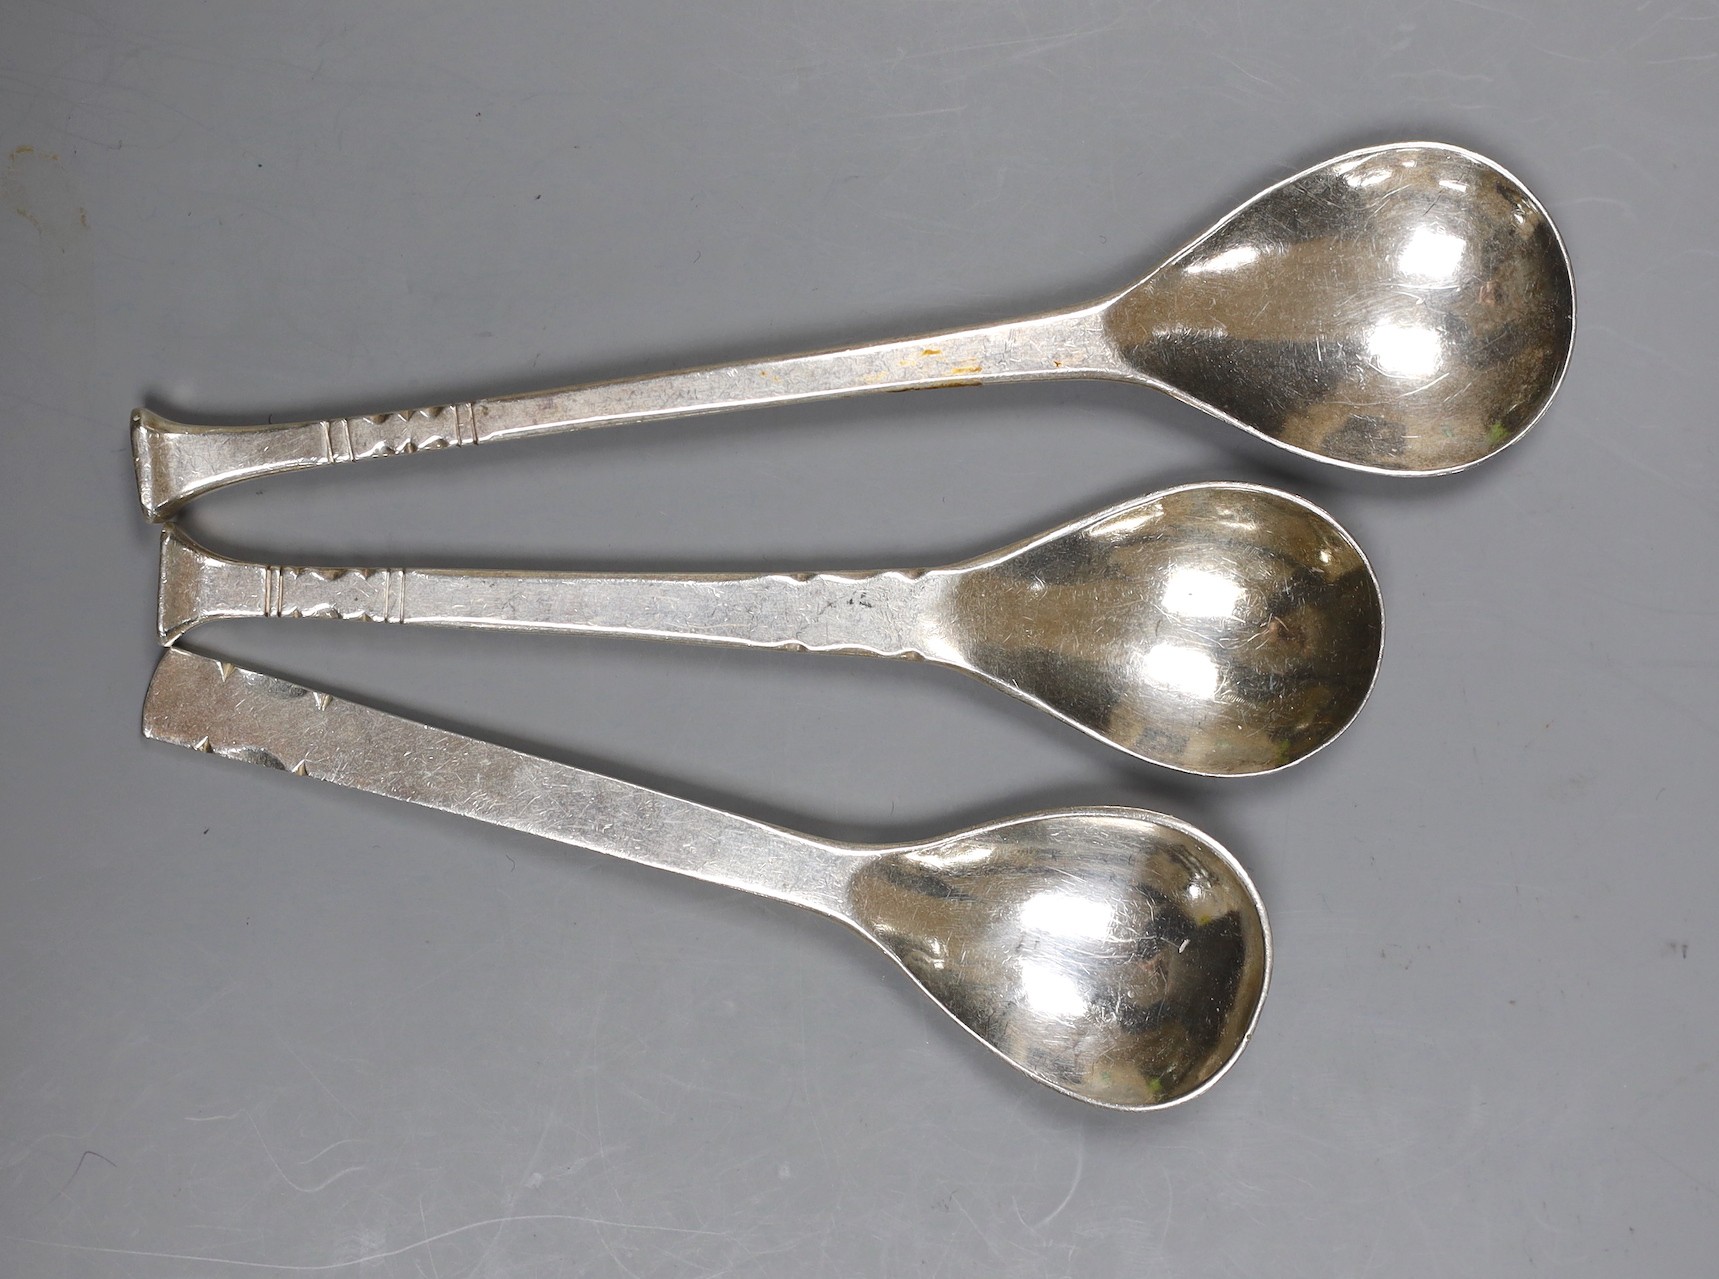 Three assorted modern Art s& Crafts Guild of handcrafts spoons, London, 1968, 1978 & 1980, one with rat on the back of the bowl, longest 17.5cm, 154 grams.